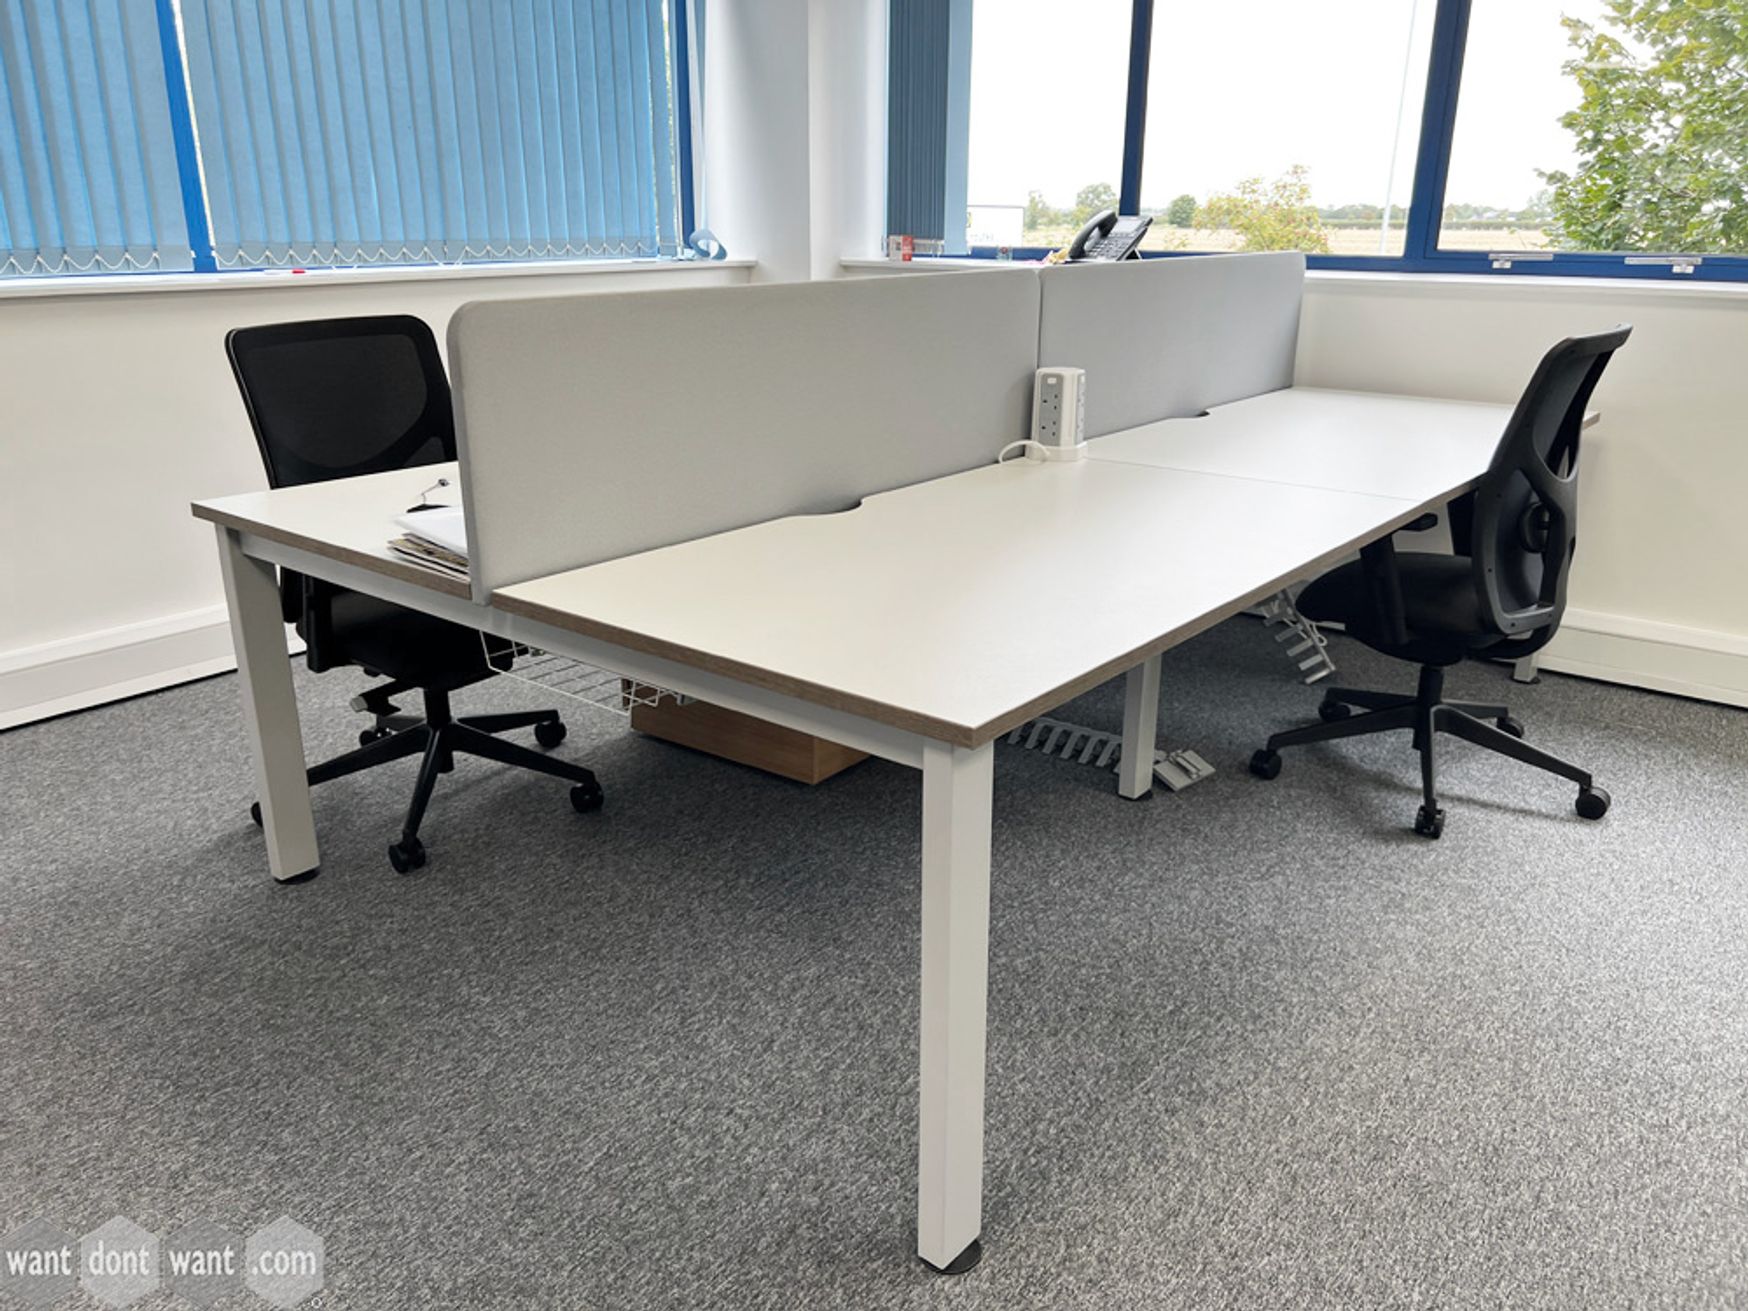 A used 4-person white bench desk with each desk position measuring 1400mm wide. 